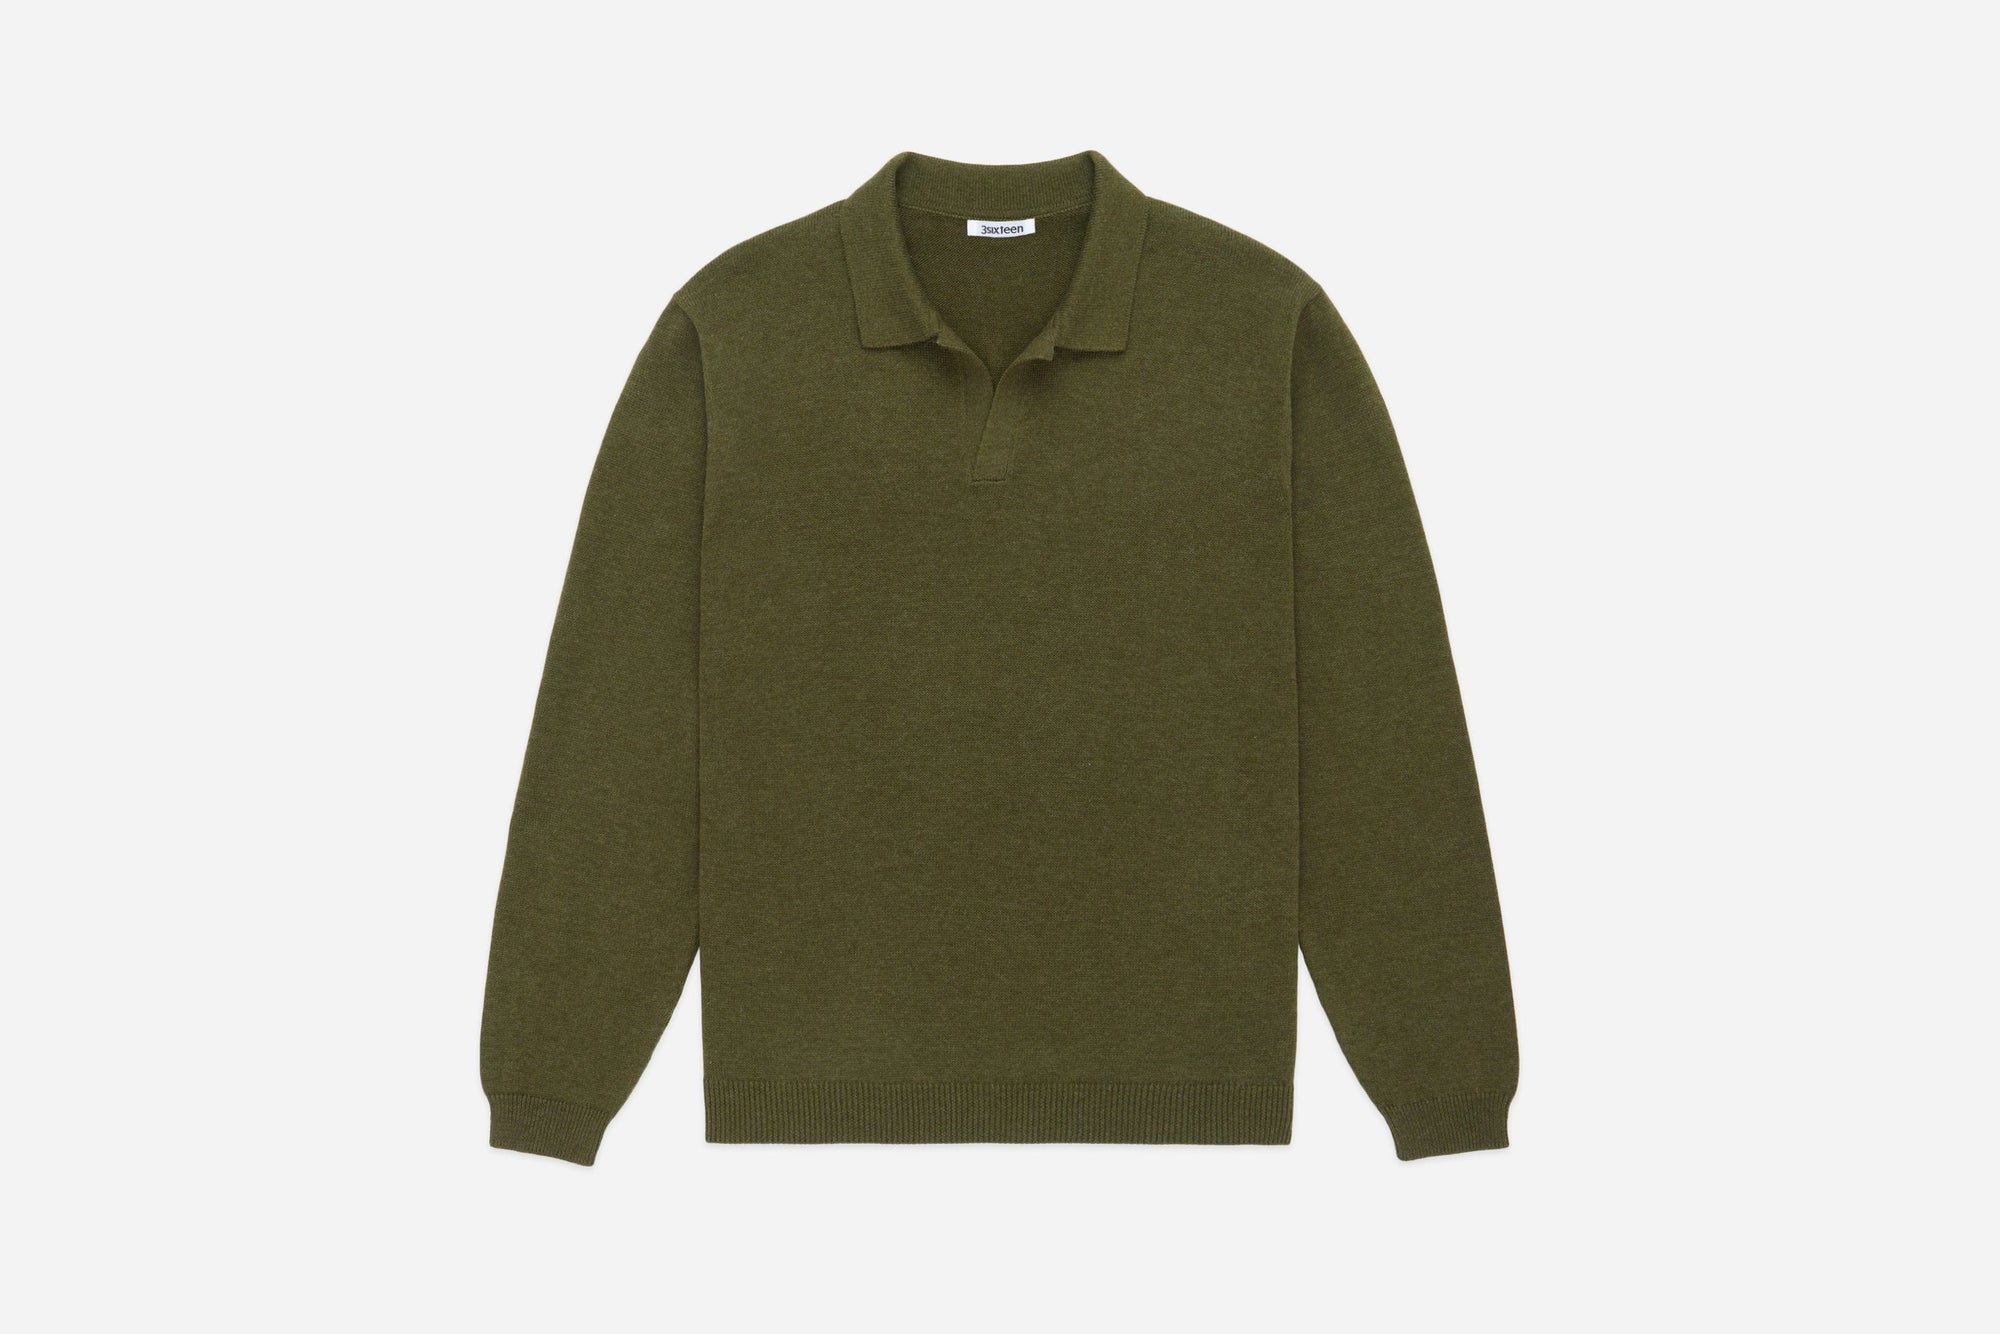 3Sixteen Long Sleeve Knit Polo in Olive